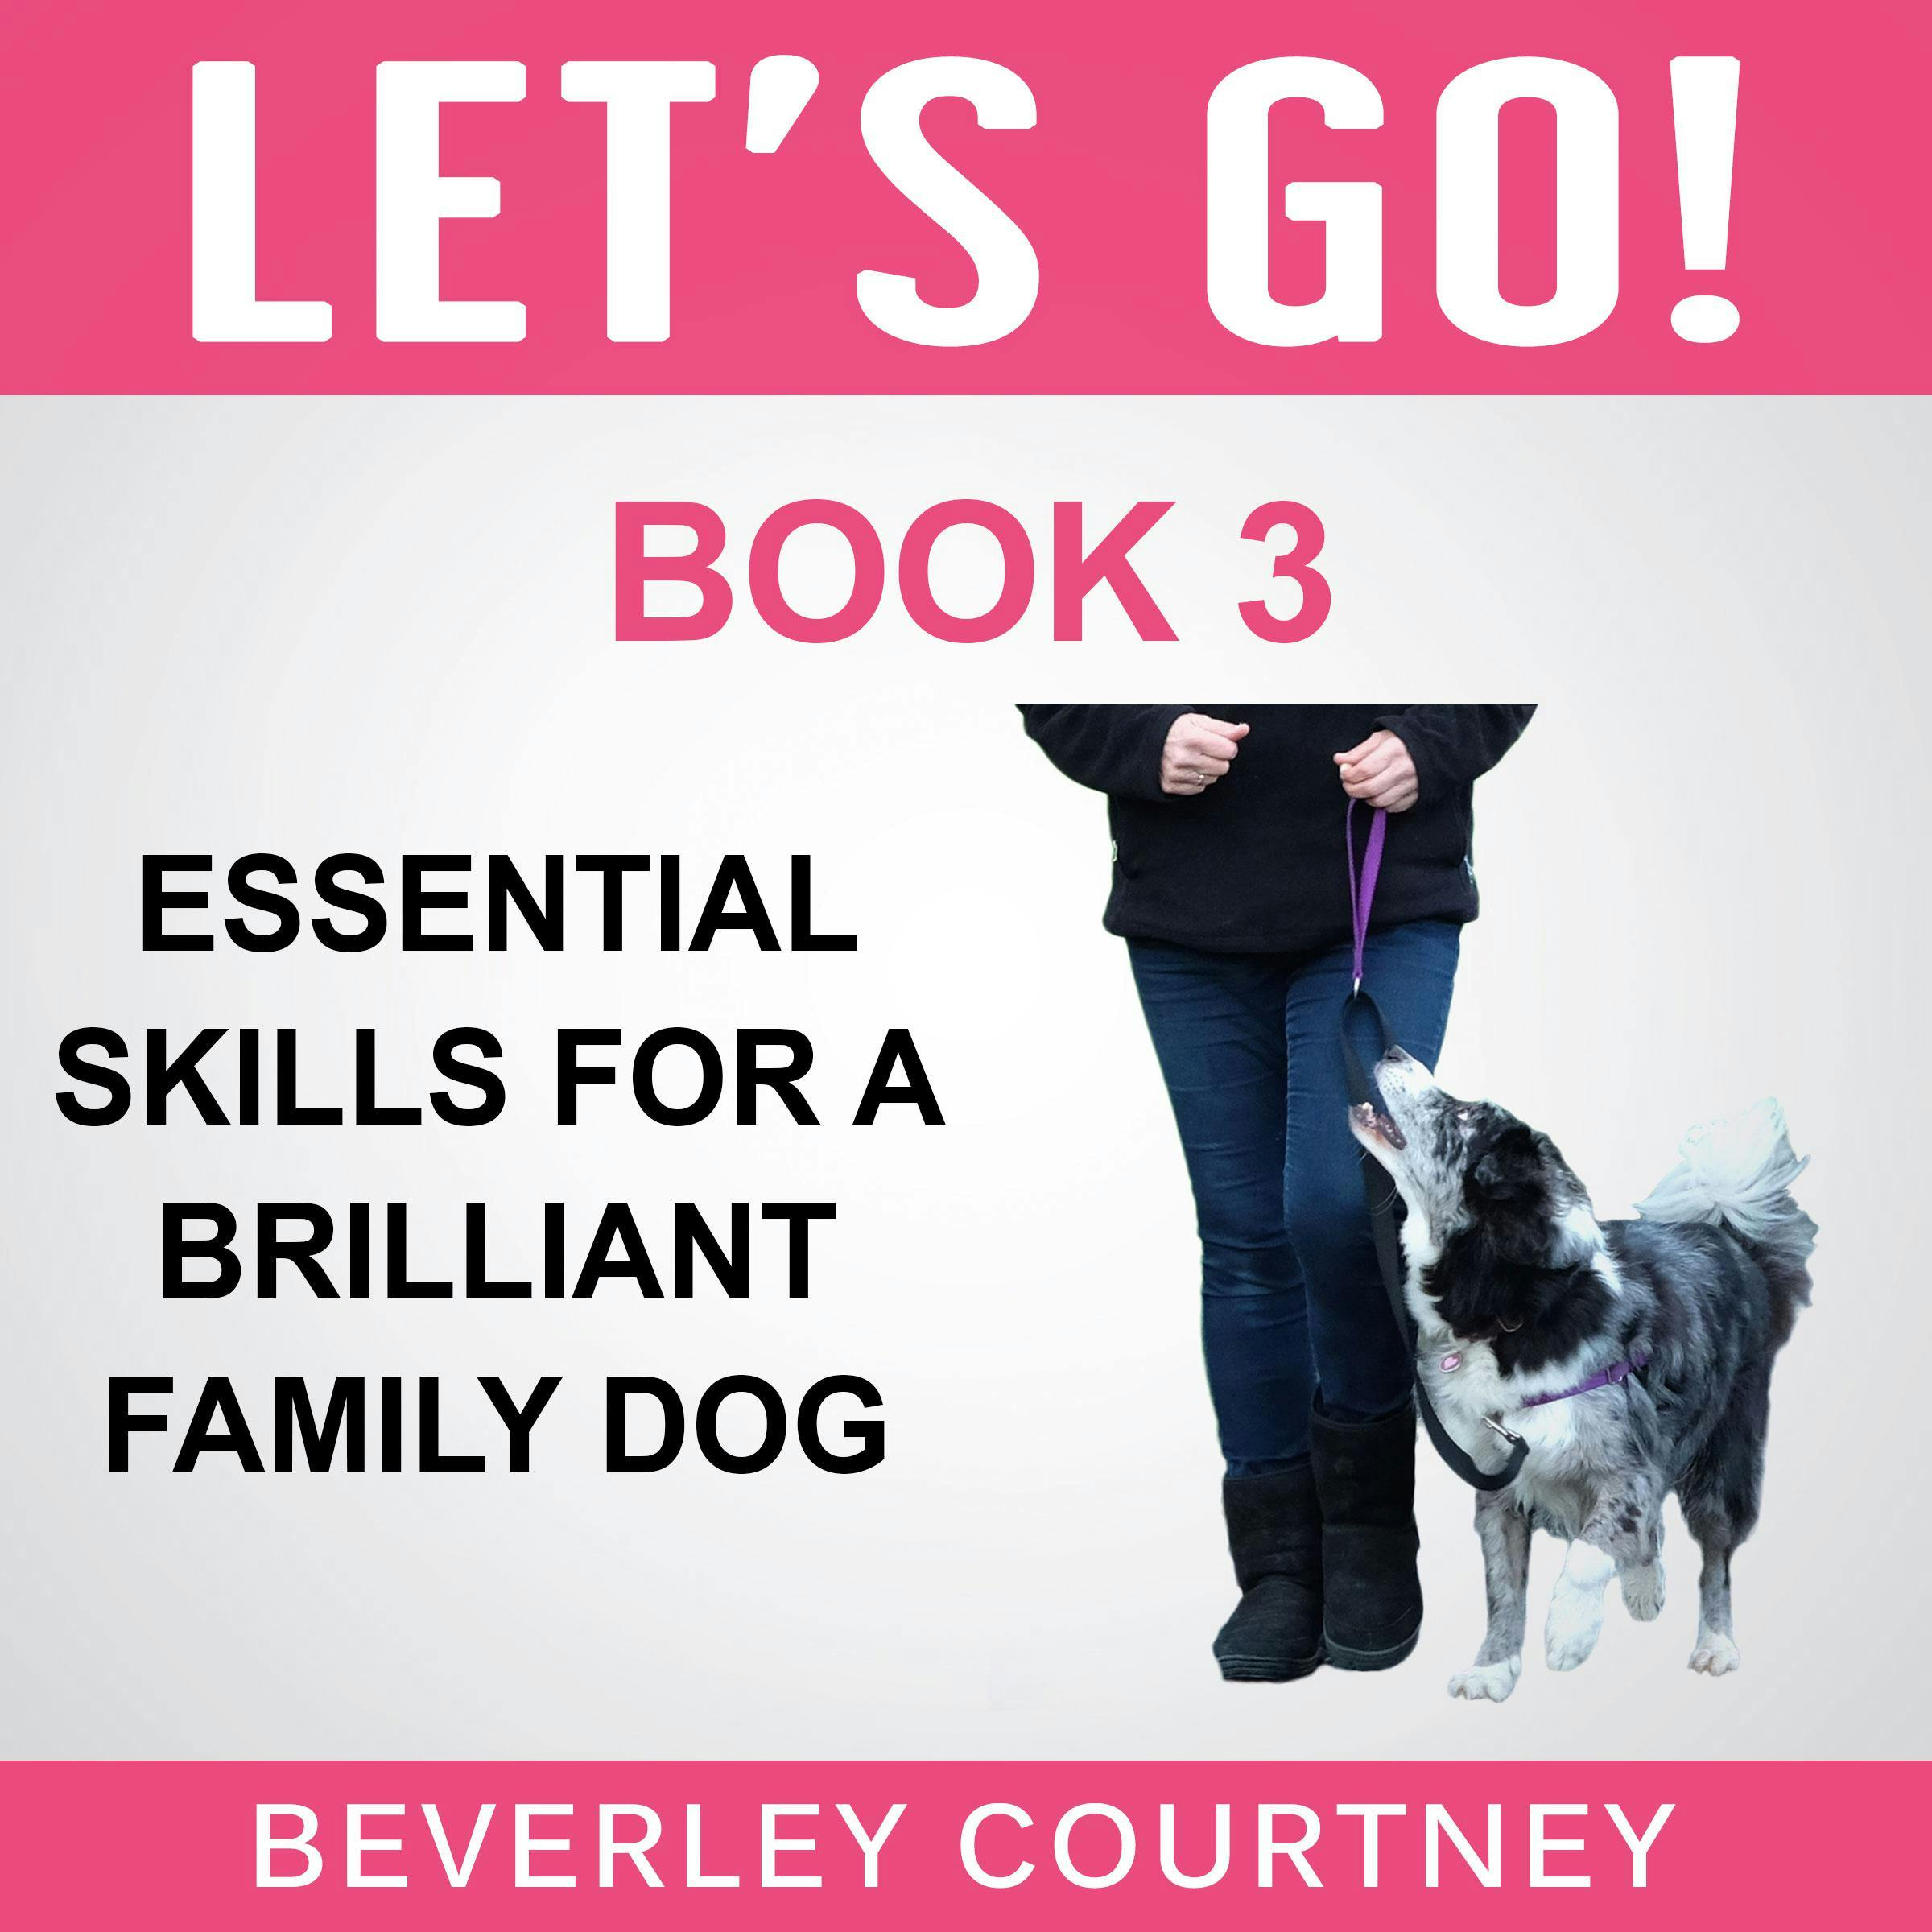 Let's Go! Essential Skills for a Brilliant Family Dog, Book 3: Enjoy Companionable Walks with your Brilliant Family Dog - Beverley Courtney